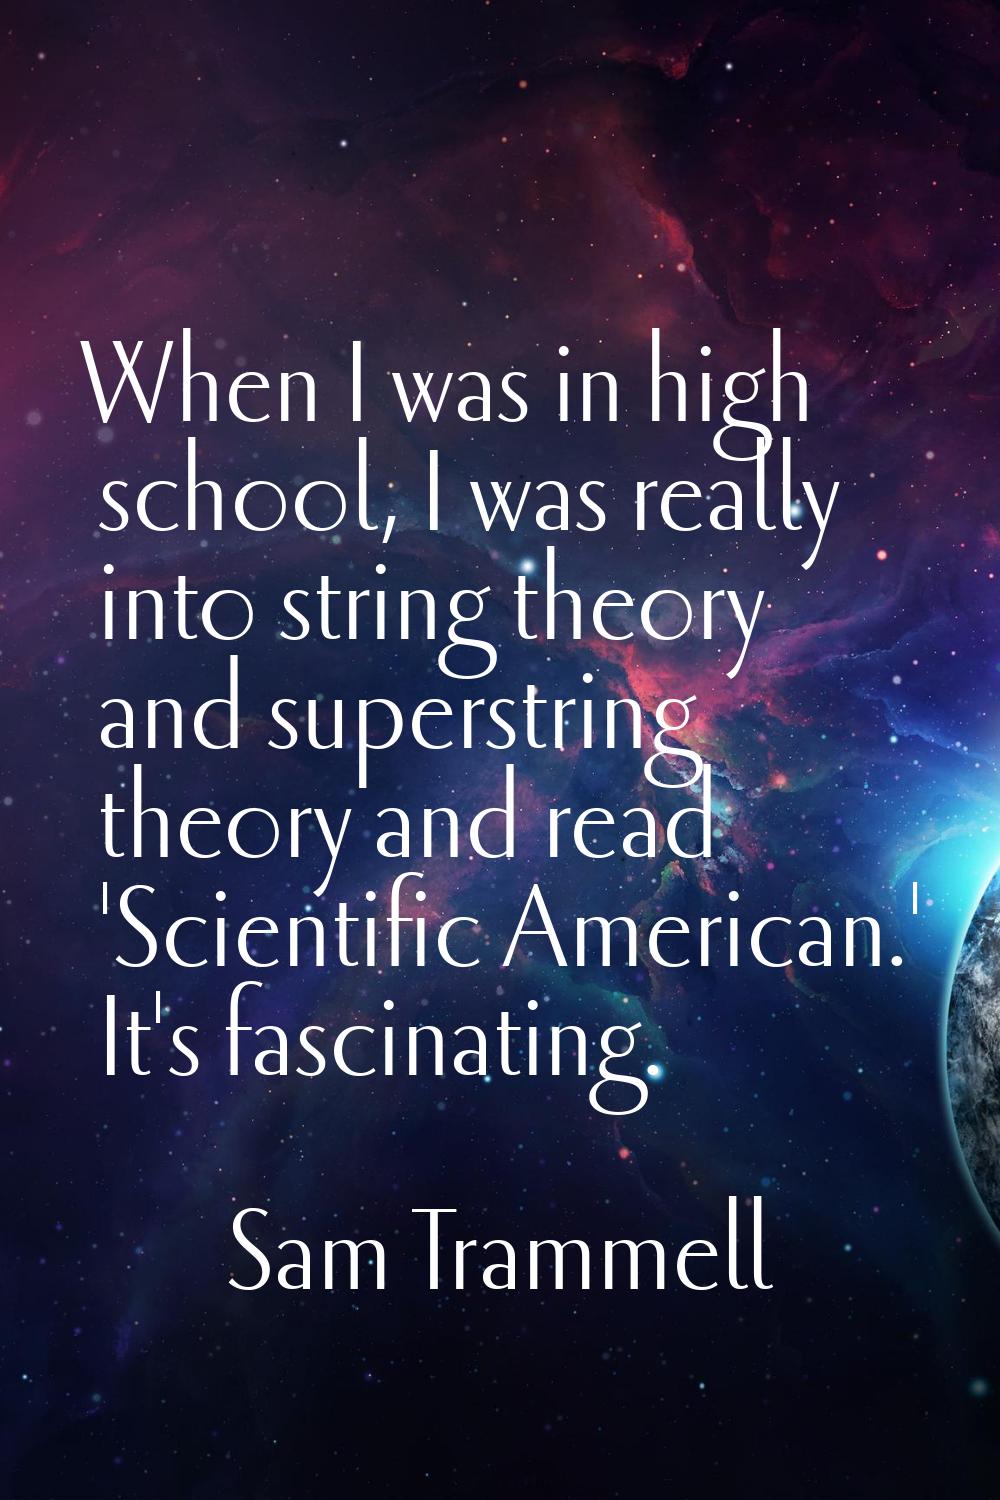 When I was in high school, I was really into string theory and superstring theory and read 'Scienti